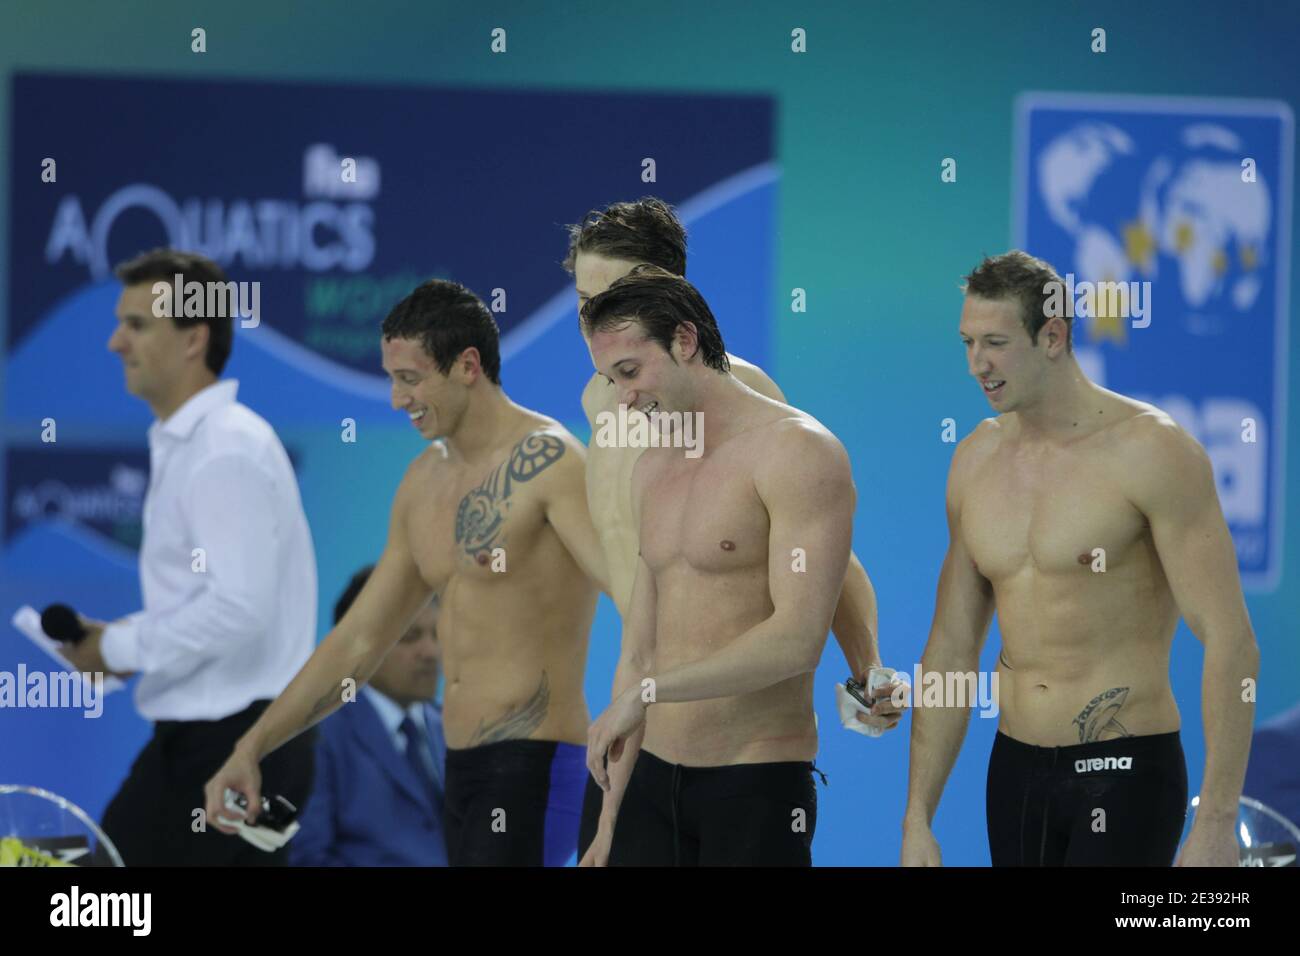 Alain Bernard, Frederick Bousquet, Fabien Gilot and Yannick Agnel of France celebrate after winning the Gold medals in the Men's 4Ax100m Freestyle final during day one of the 10th FINA World Swimming Championships (25m) at the Hamdan bin Mohammed bin Rashid Sports Complex in Dubai, United Arab Emirates on December 15, 2010. Photo by Ammar Abd Rabbo/ABACAPRESS.COM Stock Photo